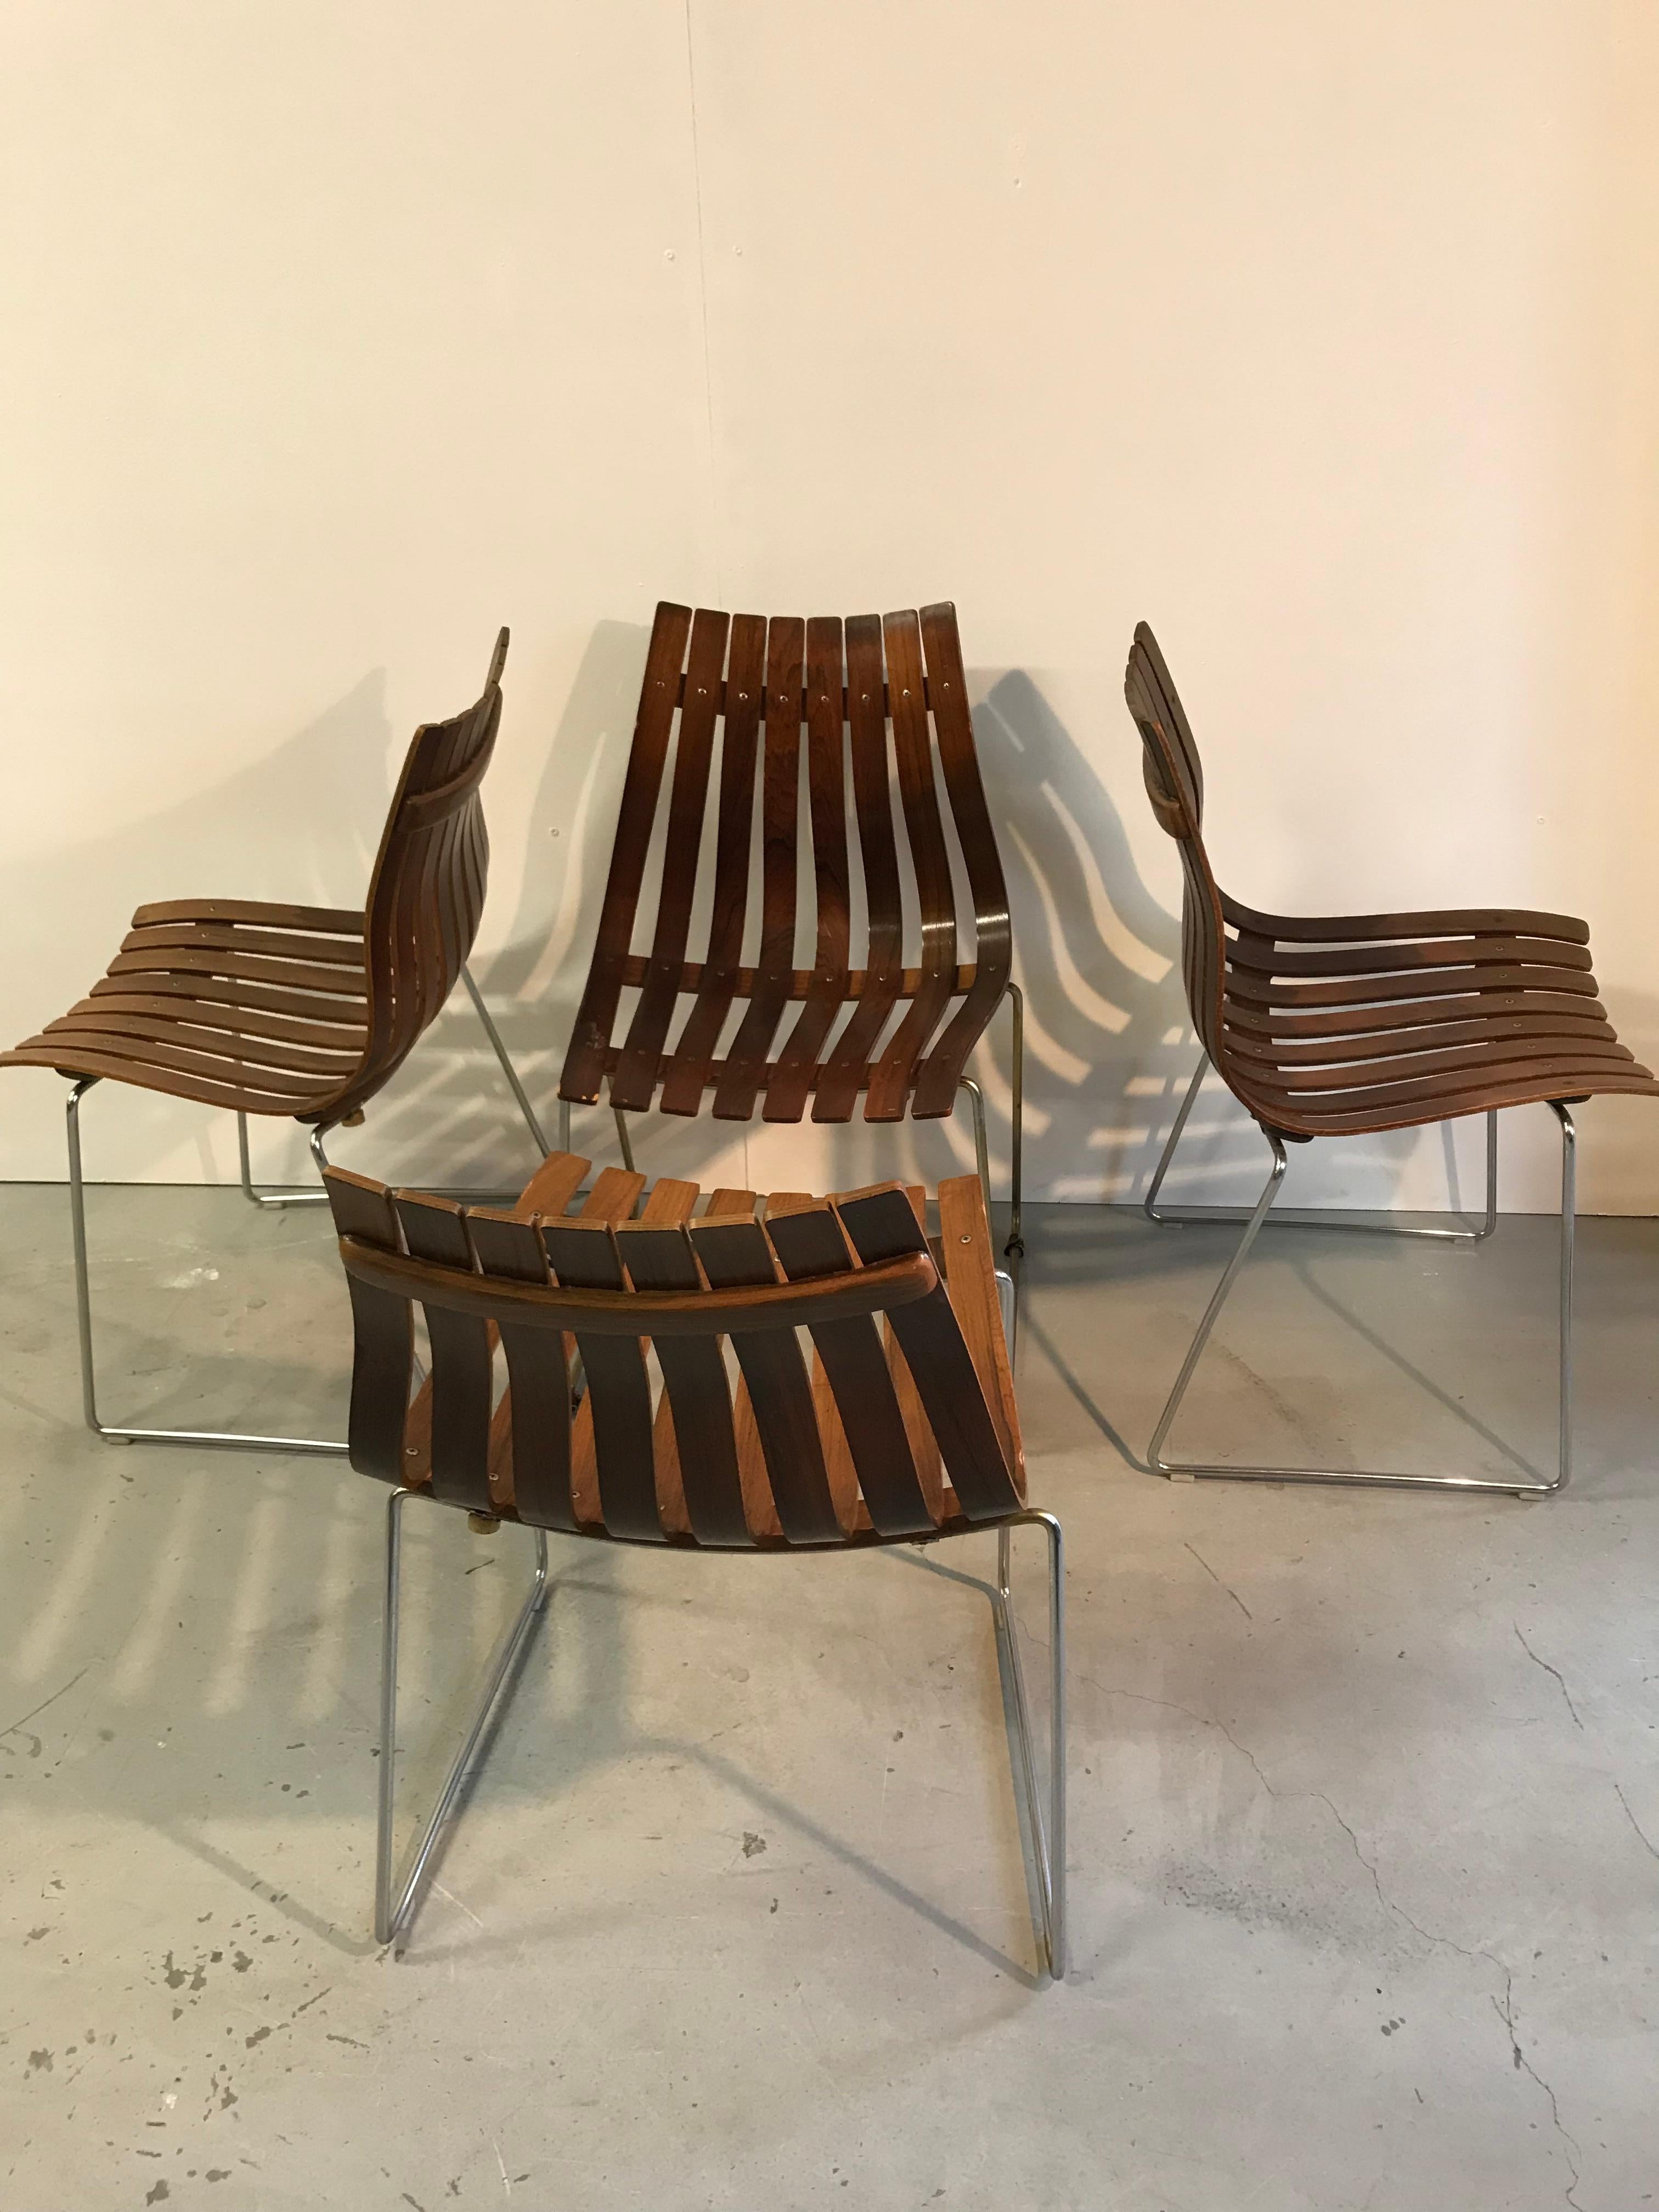 Set of 4 dining chairs designed for Hove Mobler, Norway called Scandia.
They are constructed from rosewood bentwood slats resting on a steel base. They sit wonderfully well and are in good condition.